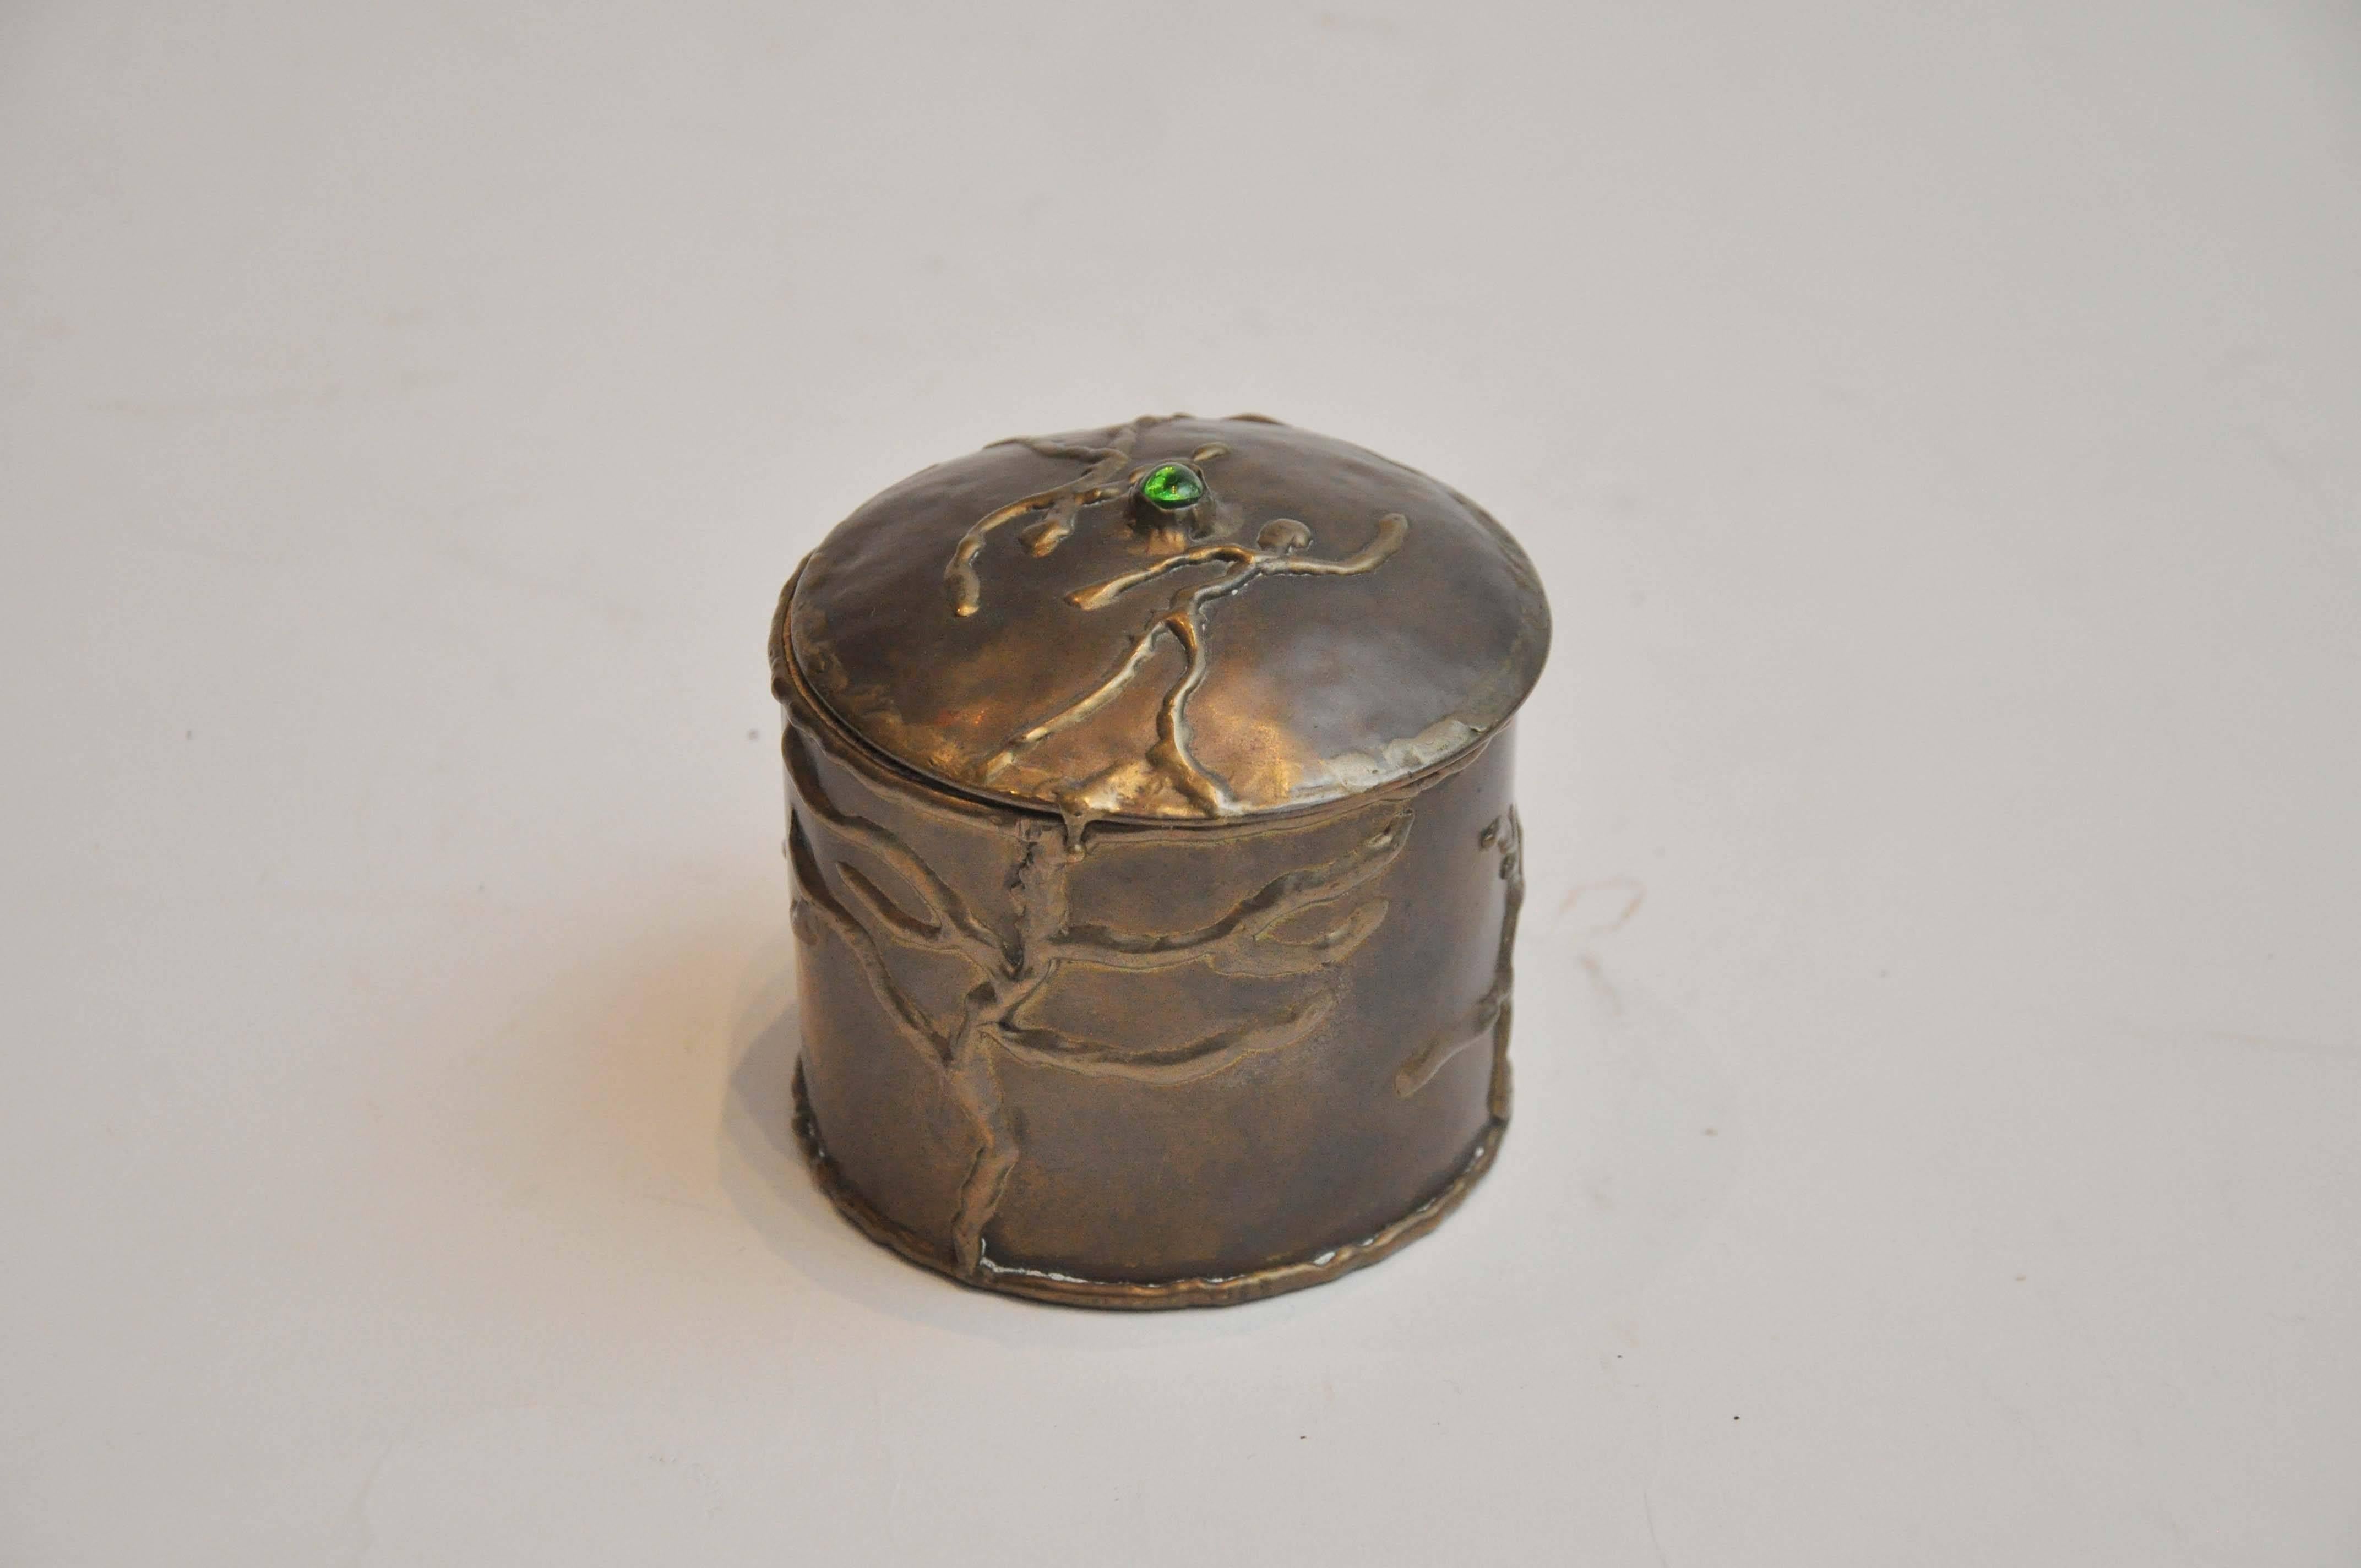 Early 20th century round brass box with cabochon stone by artist R Cervantes. Beautiful box with hinged lid. Features a raised branch detail and an emerald cabochon stone adorns the lid of the box.

Dimensions: 4"Diam x 3.75"H.